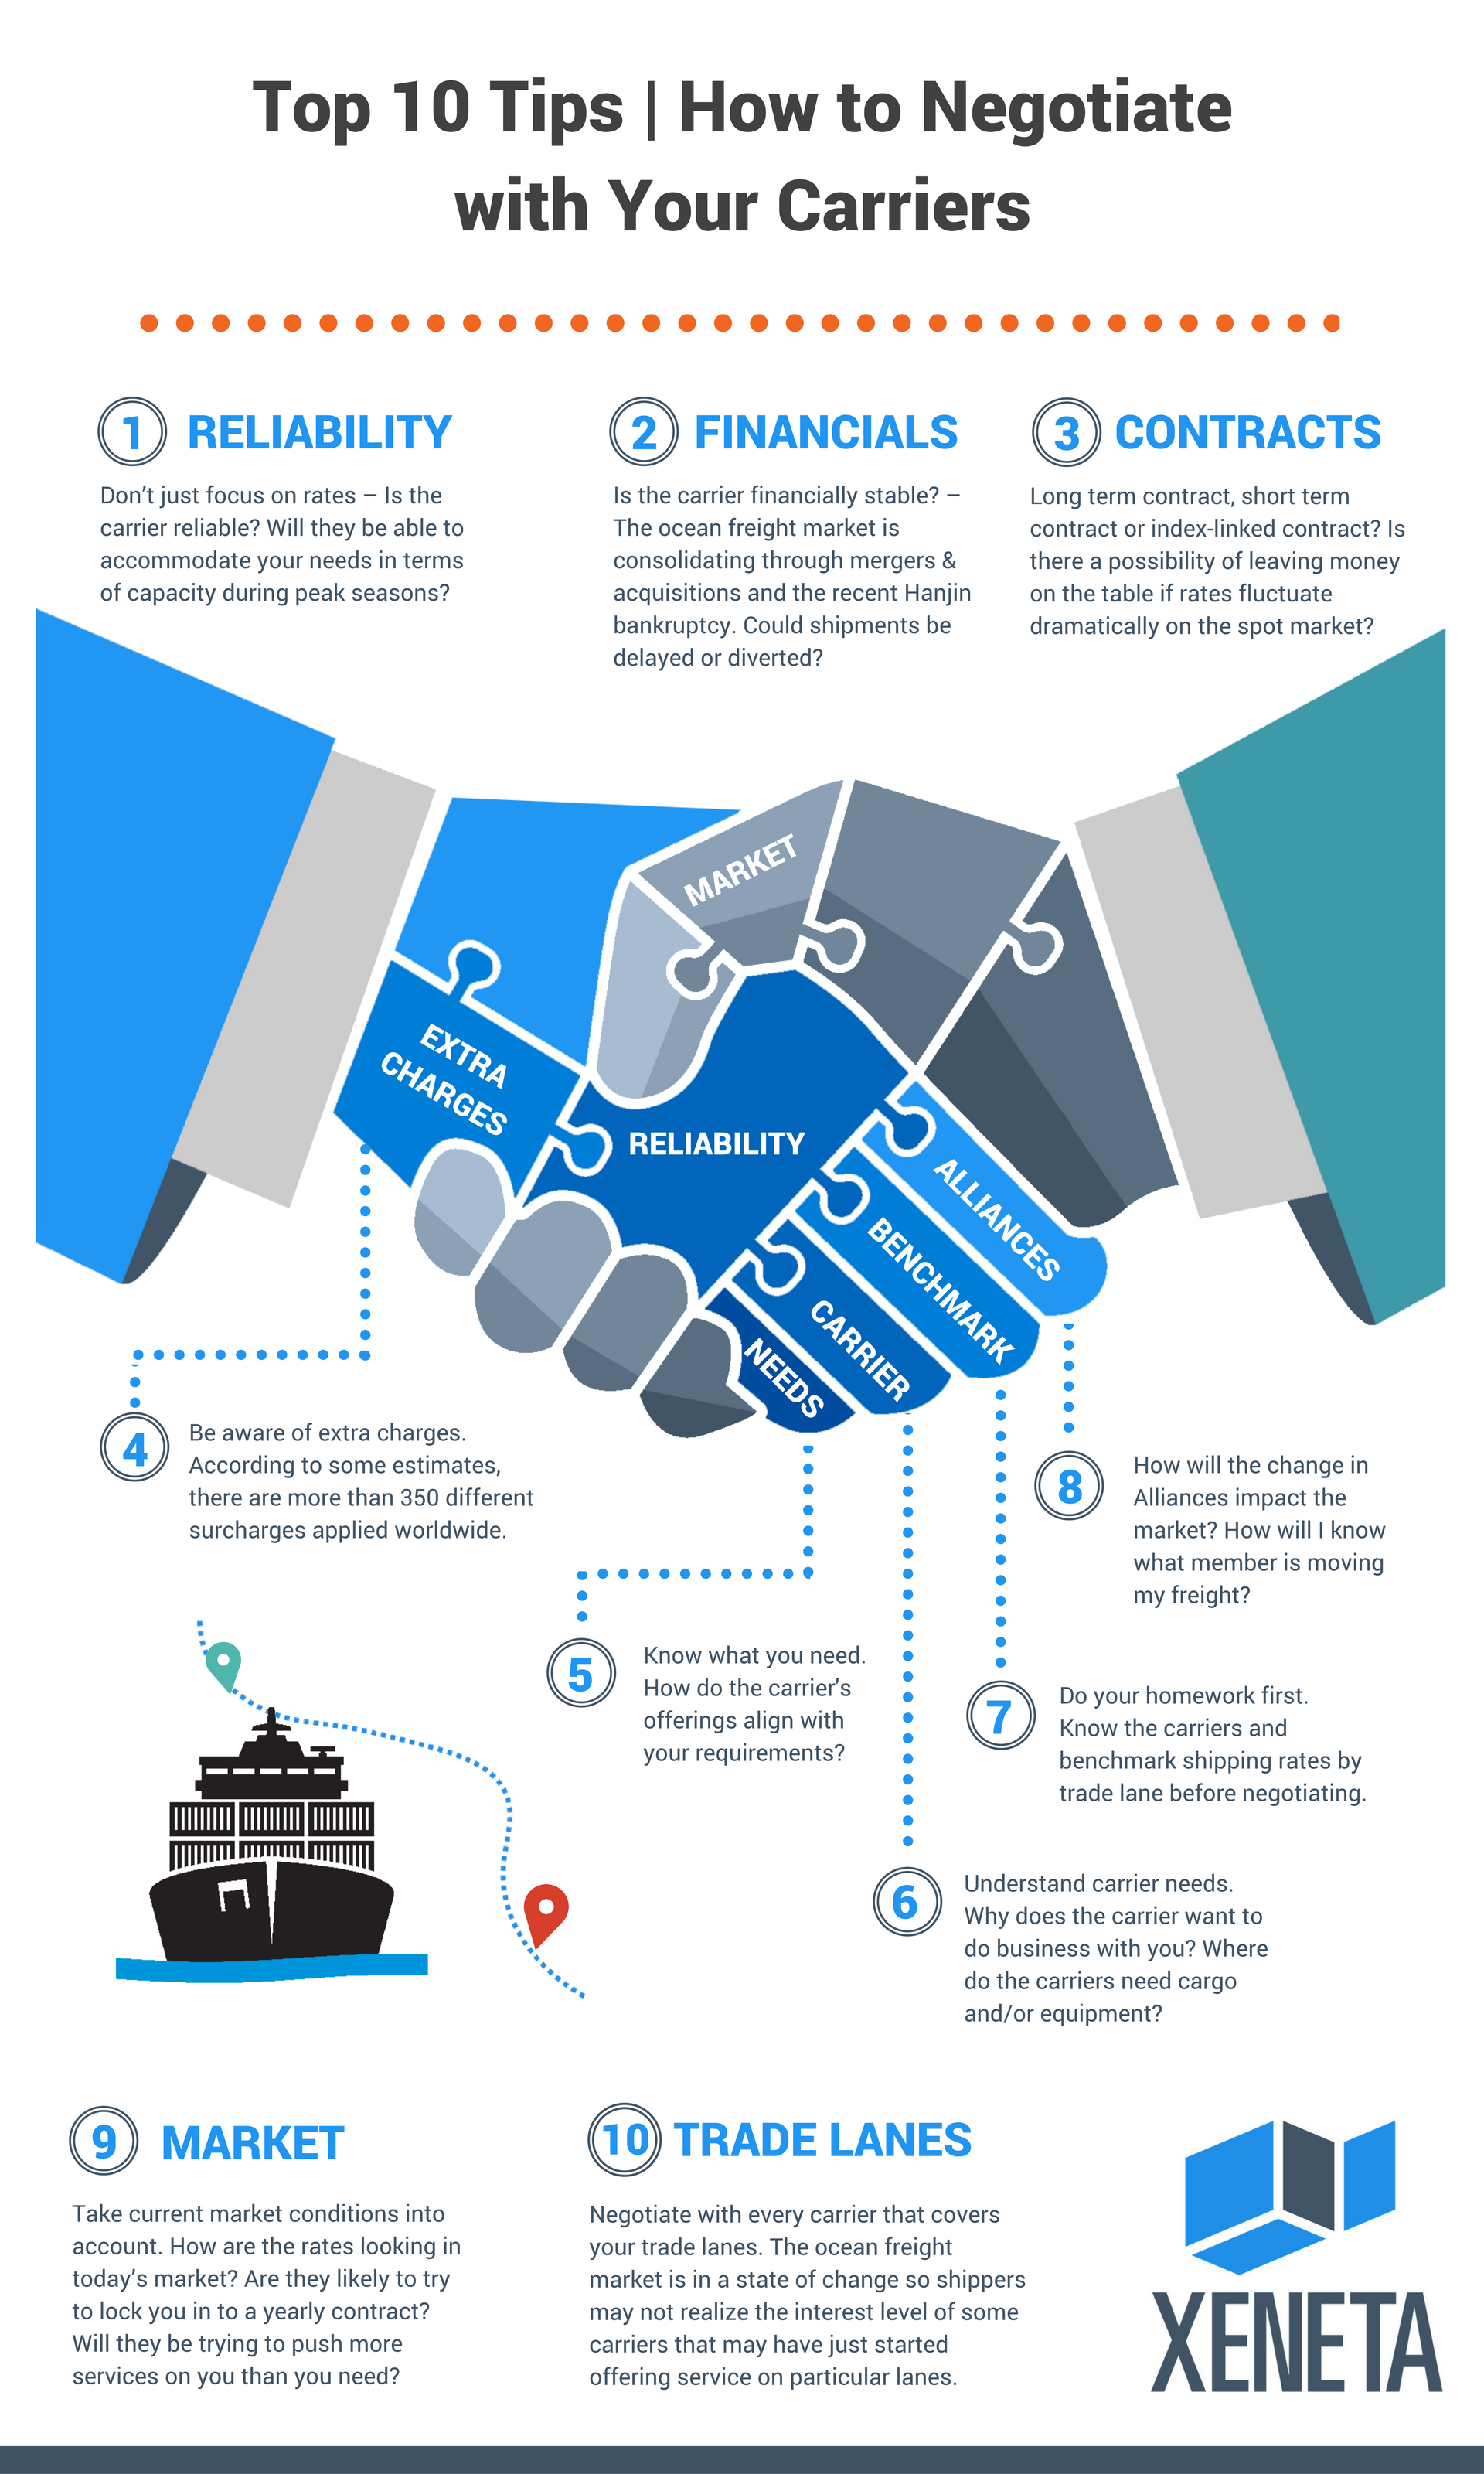 [INFOGRAPHIC] Top 10 Tips: How to Negotiate with Your Carriers